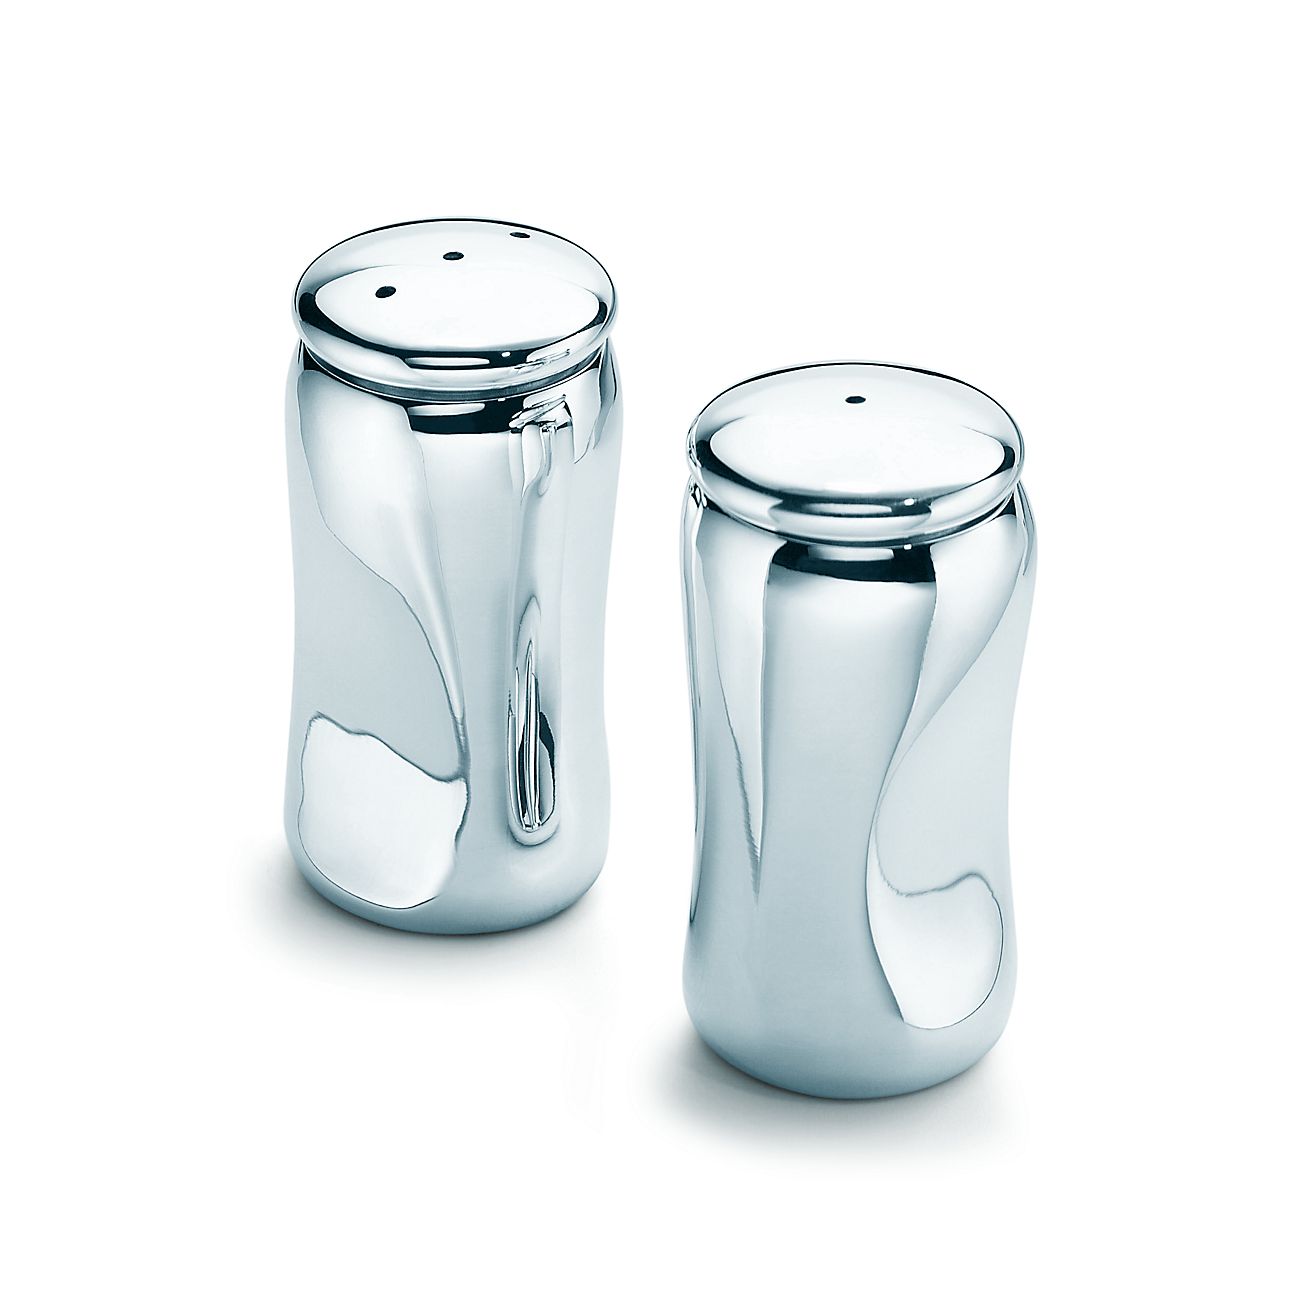 tiffany salt and pepper shakers